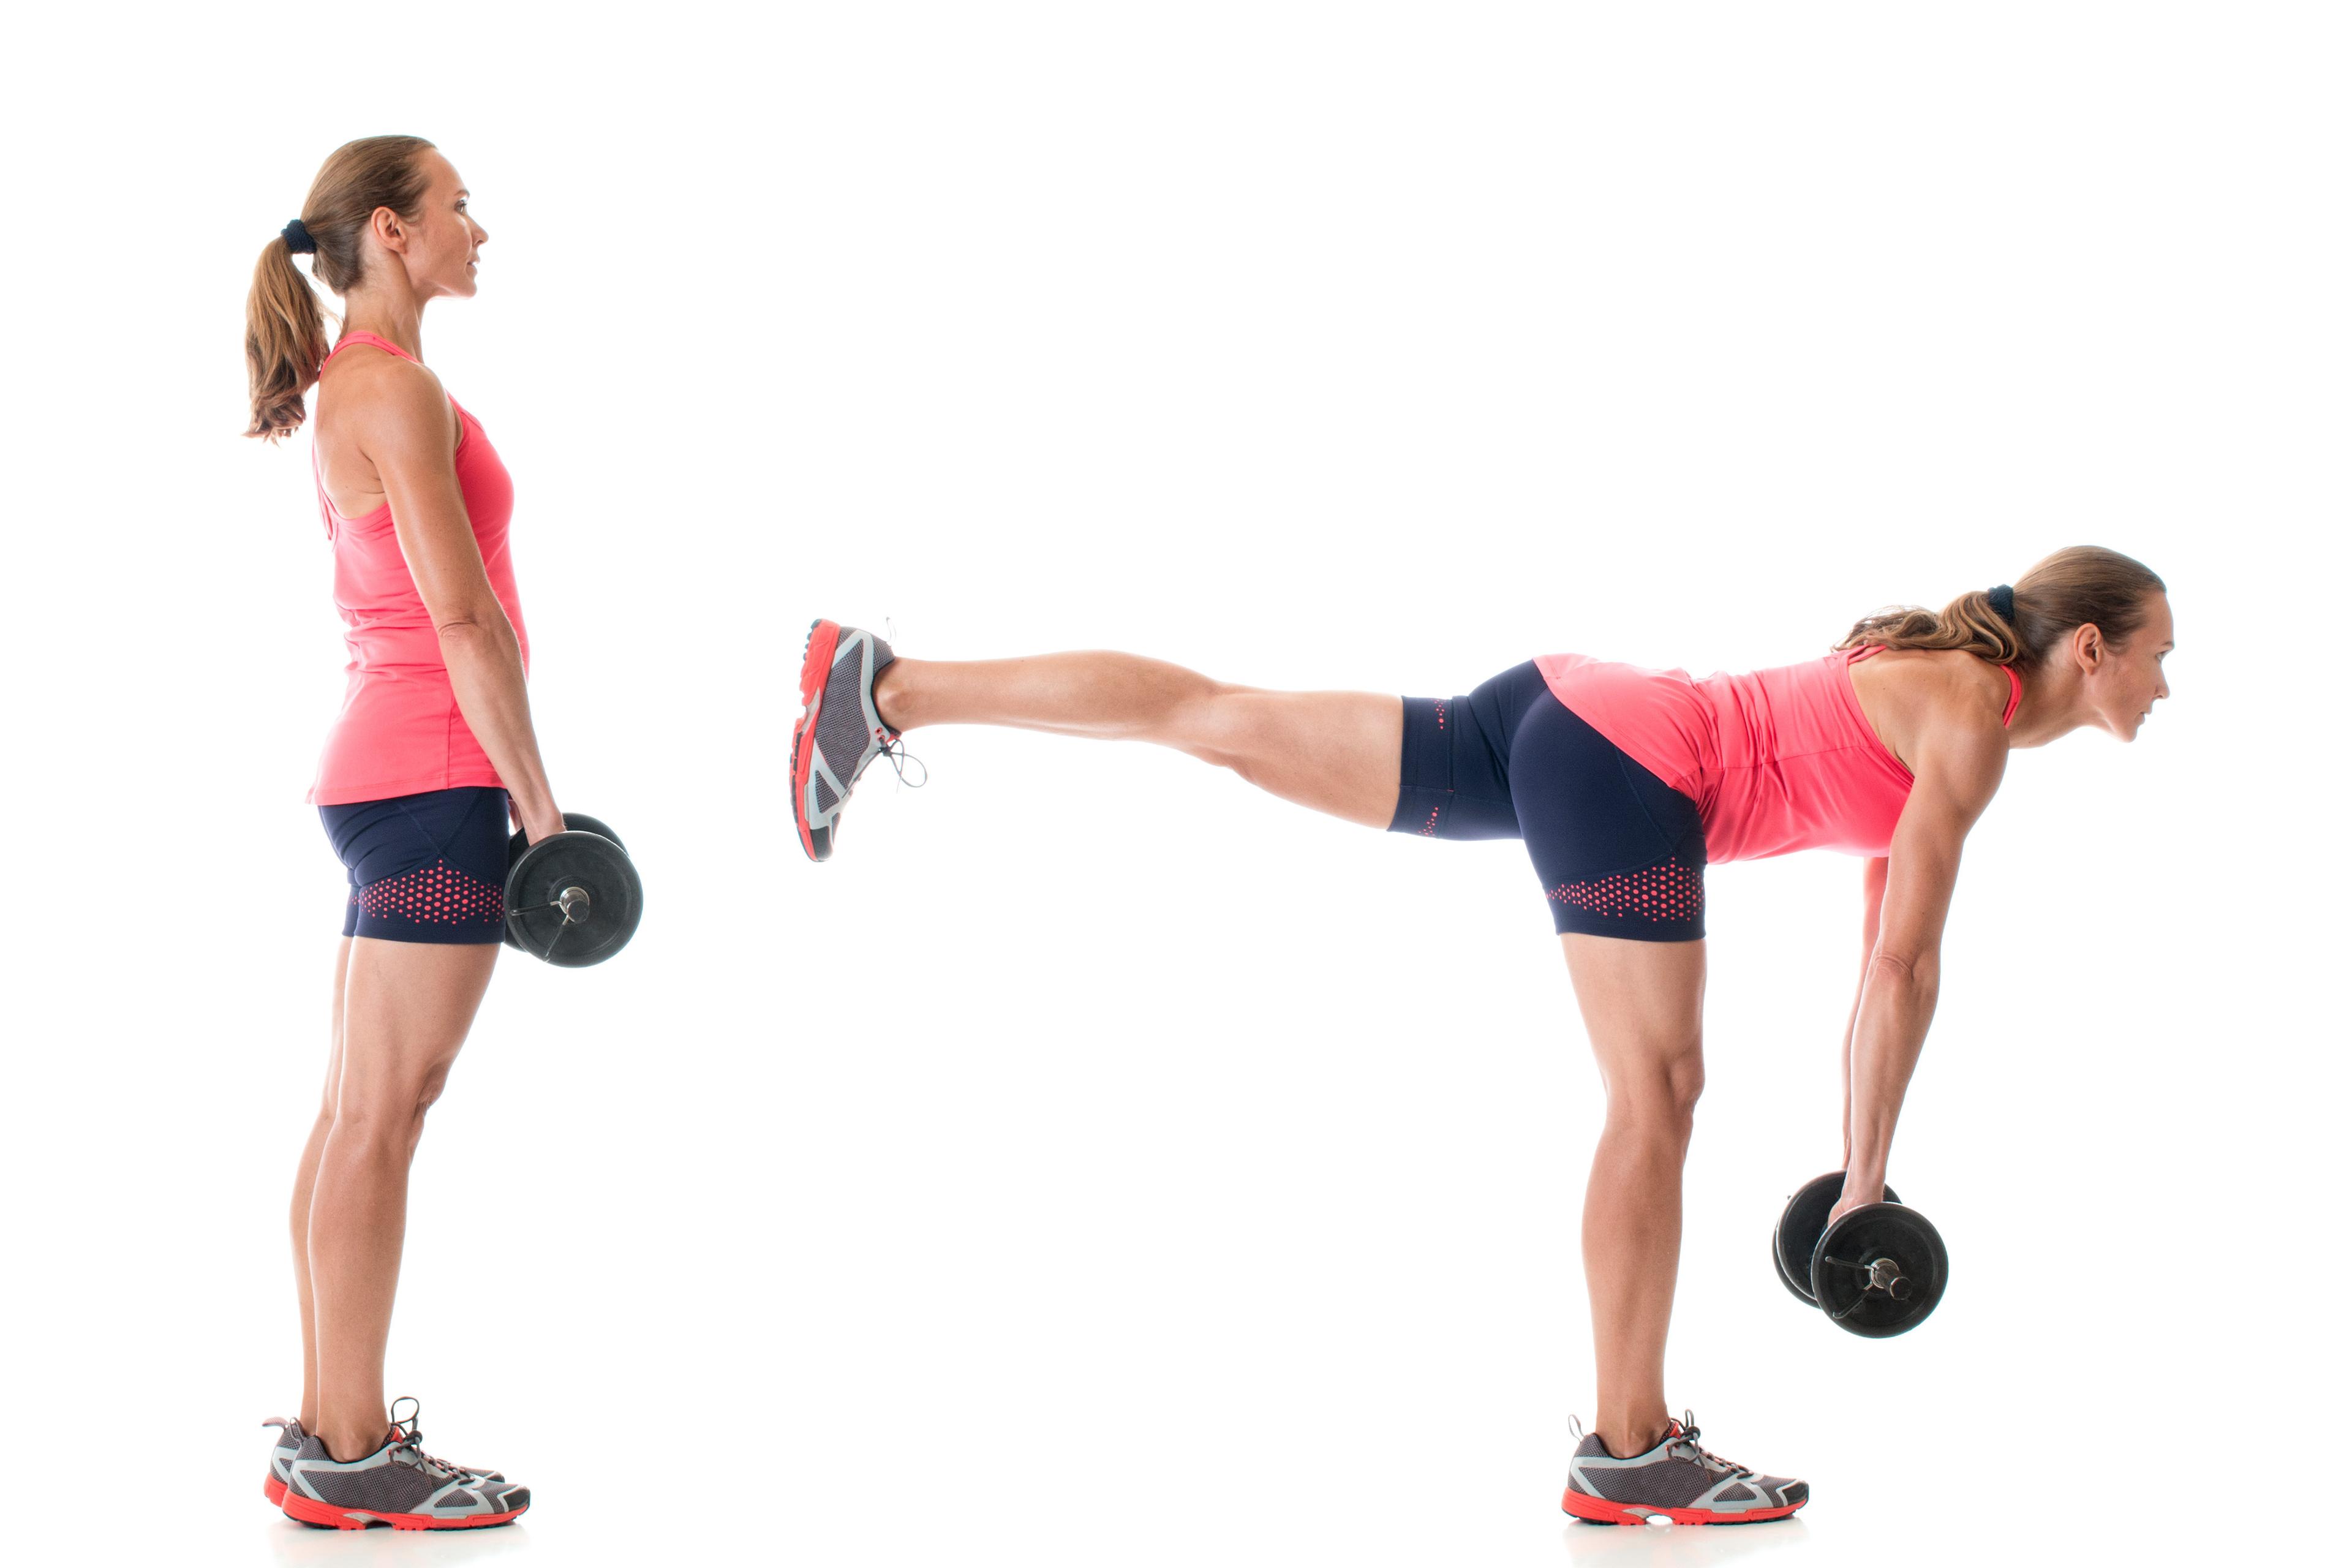 The single-leg deadlift exercise helps treat patellofemoral pain syndrome by strengthening your glutes and hamstrings while improving your position sense.